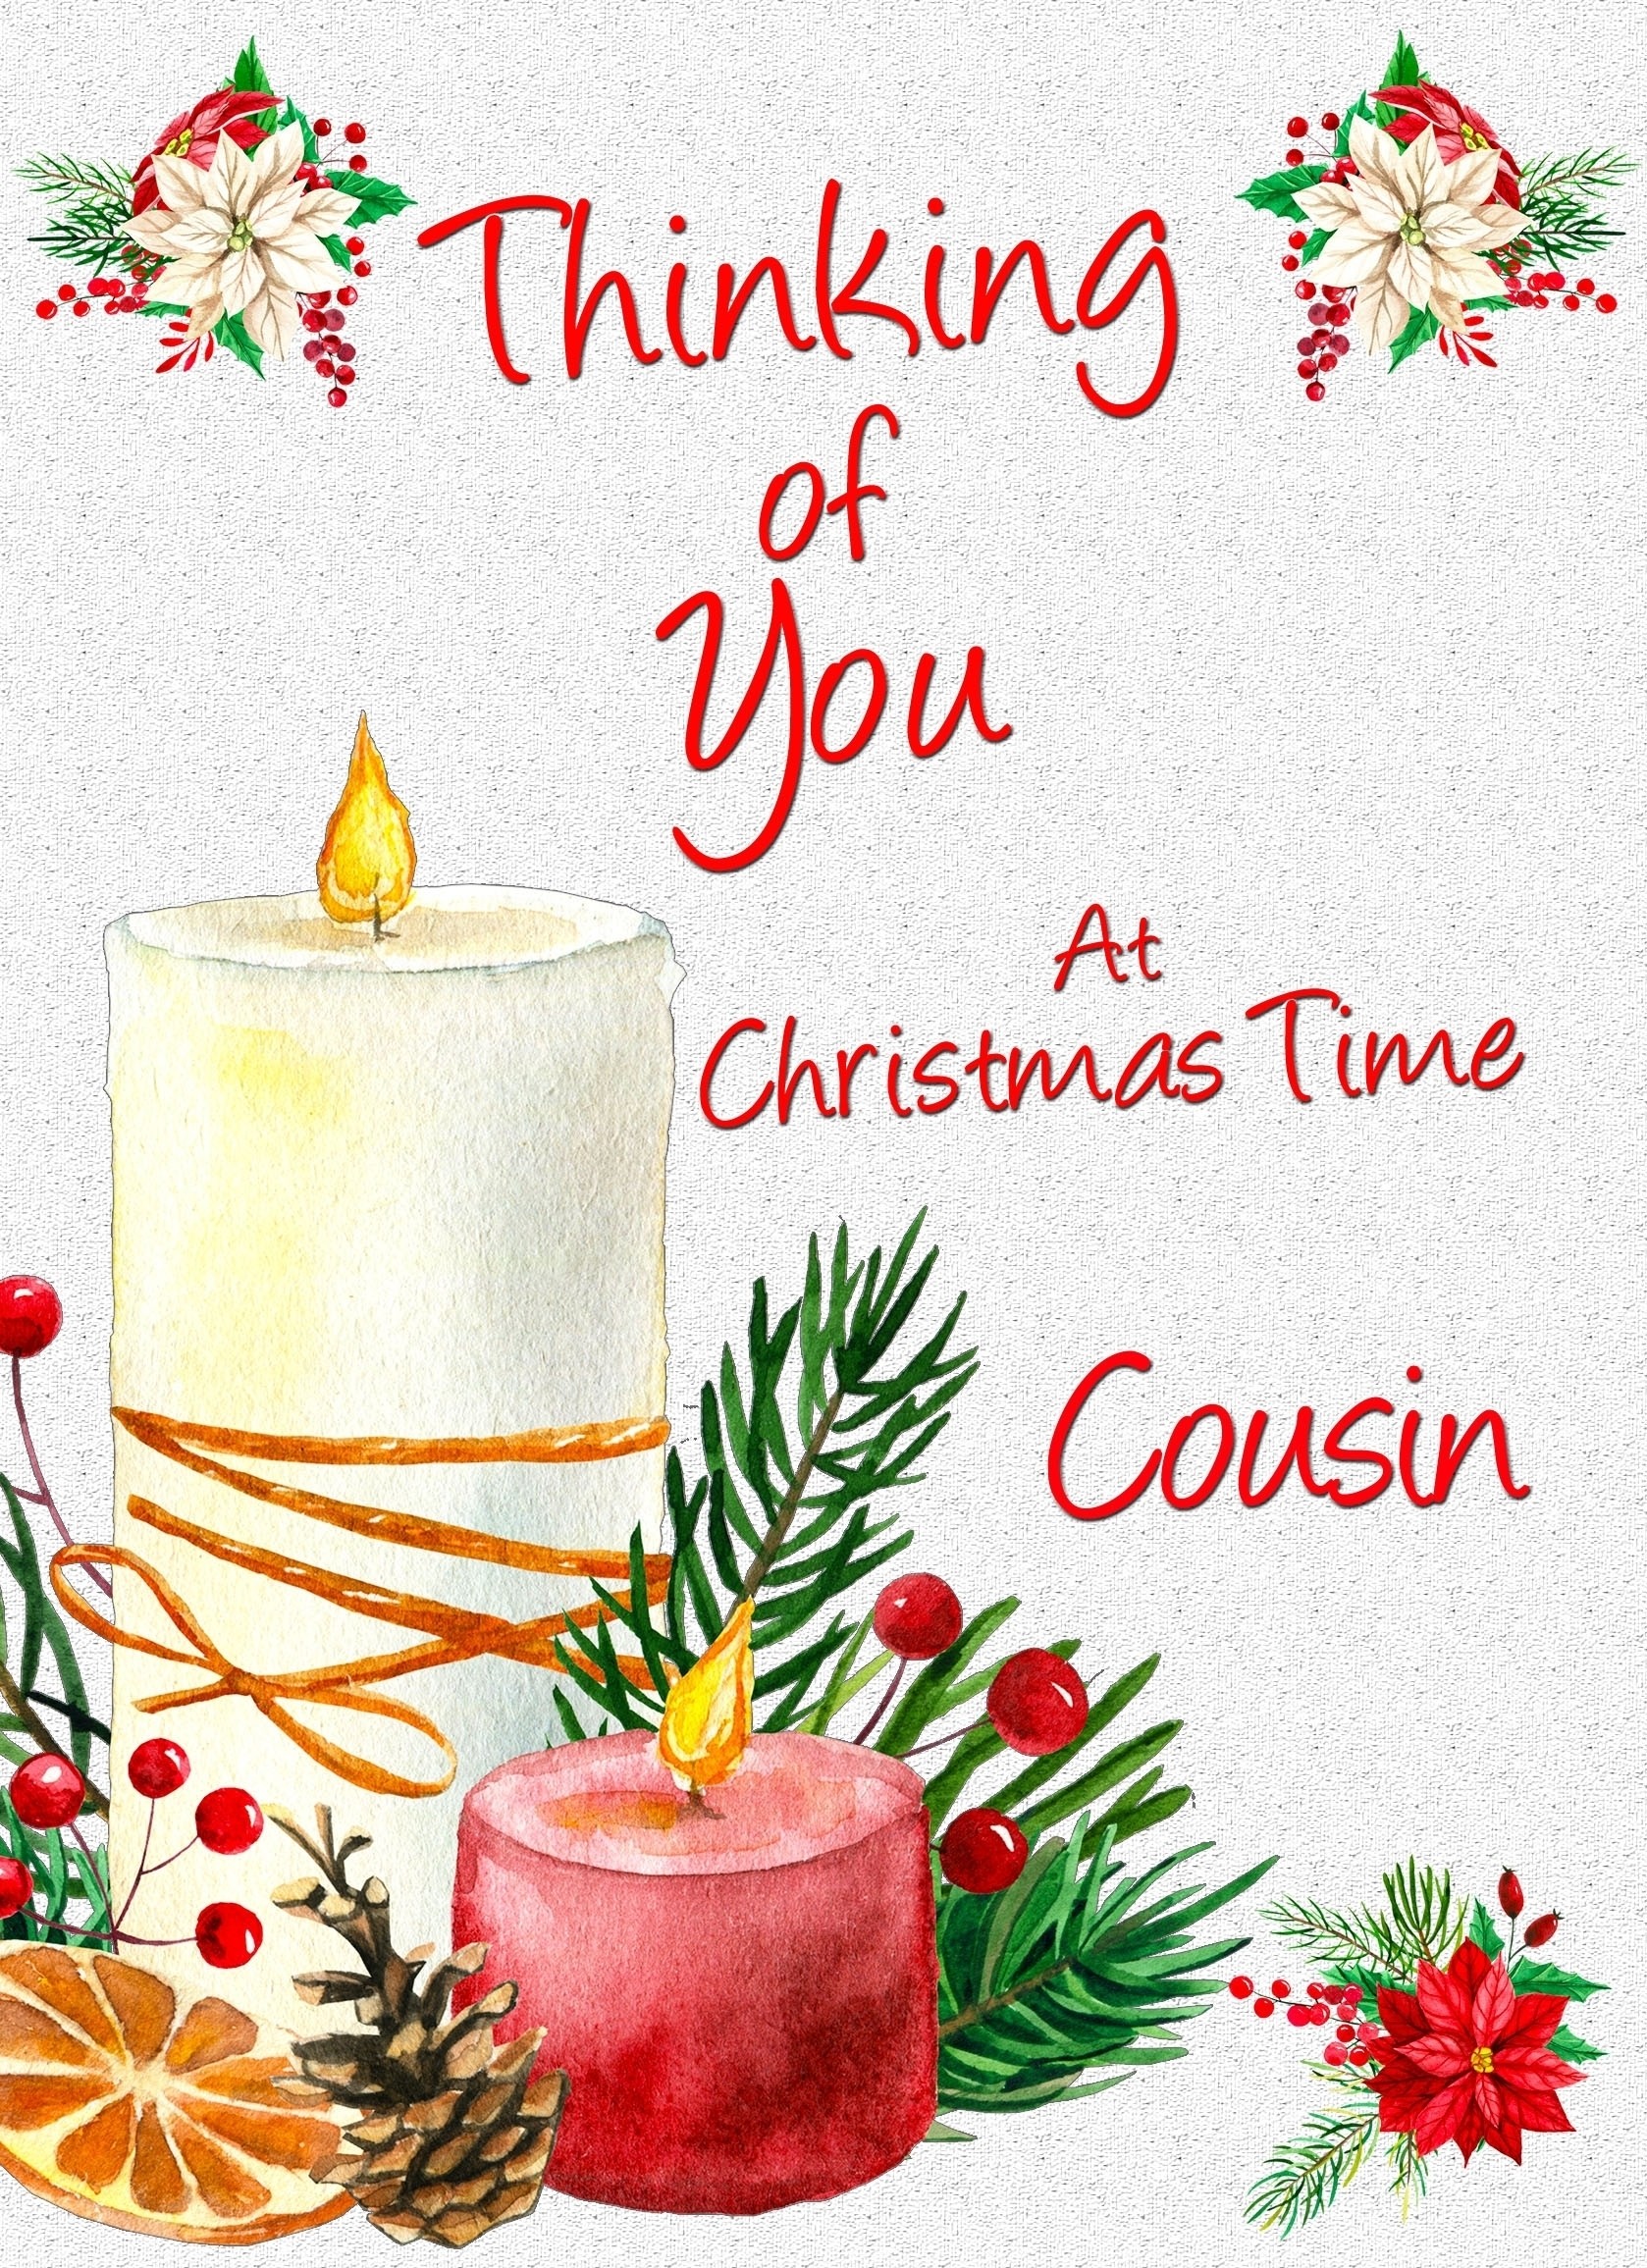 Thinking of You at Christmas Card For Cousin (Candle)